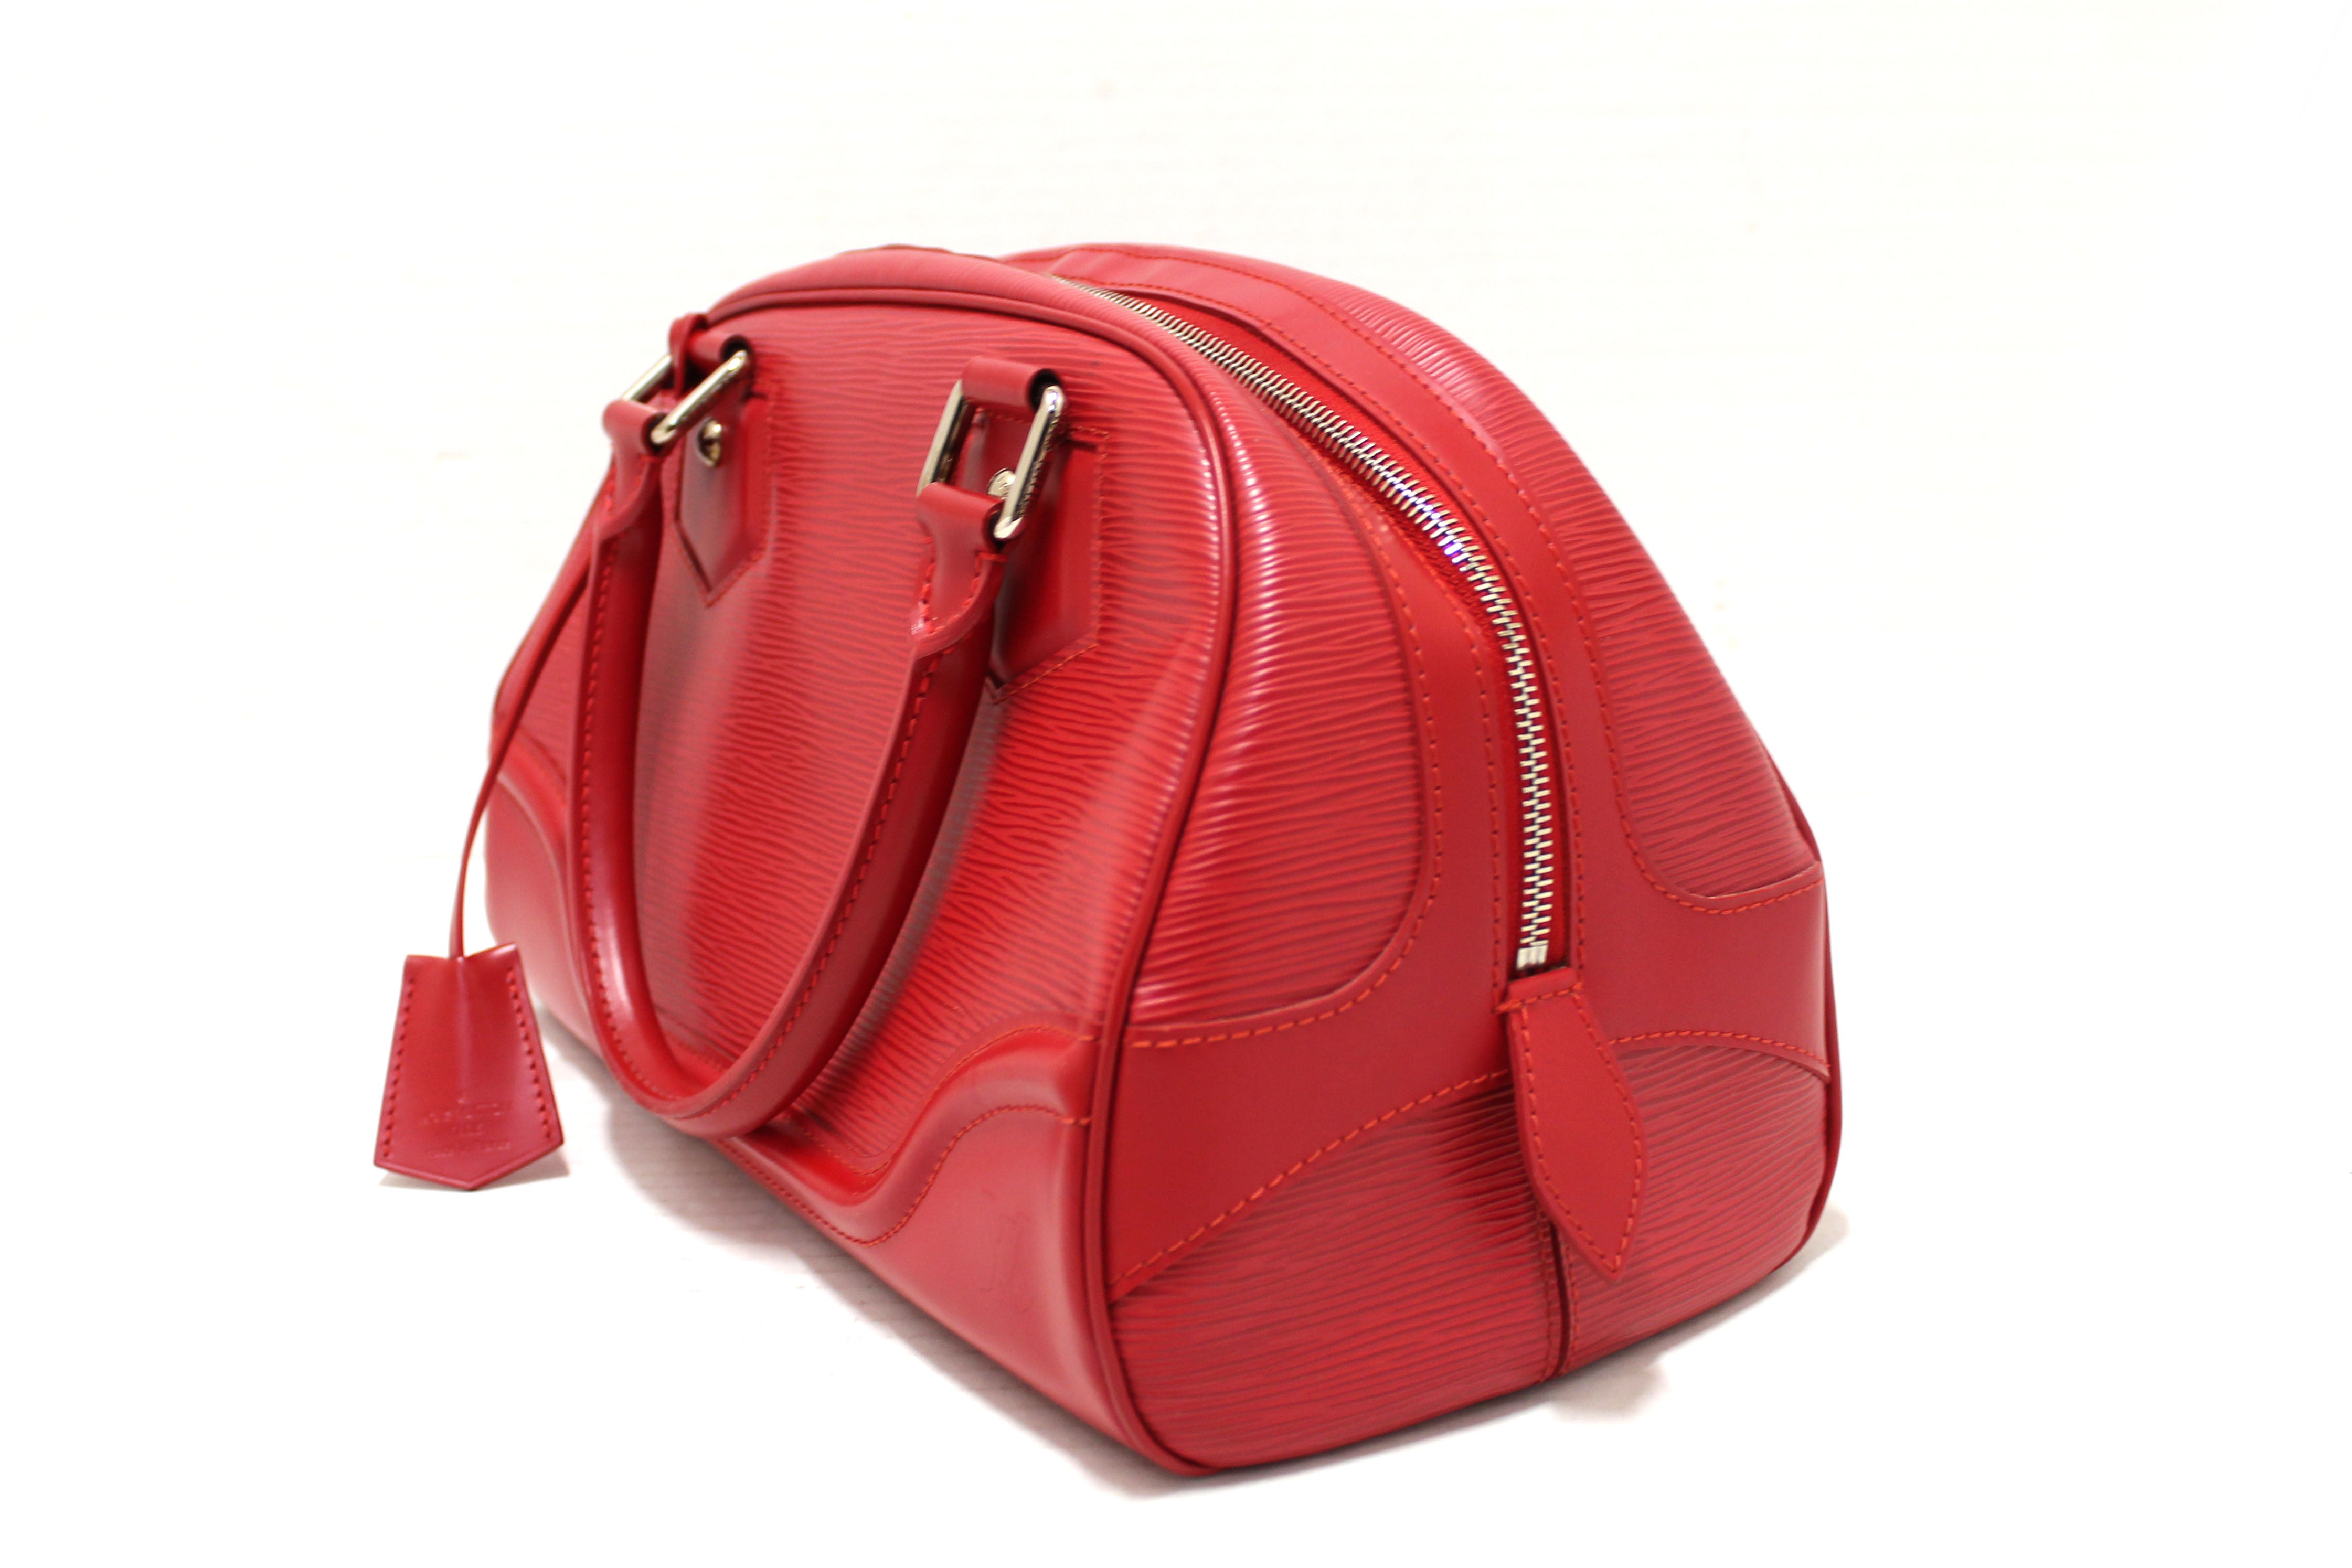 red leather louis vuittons handbags